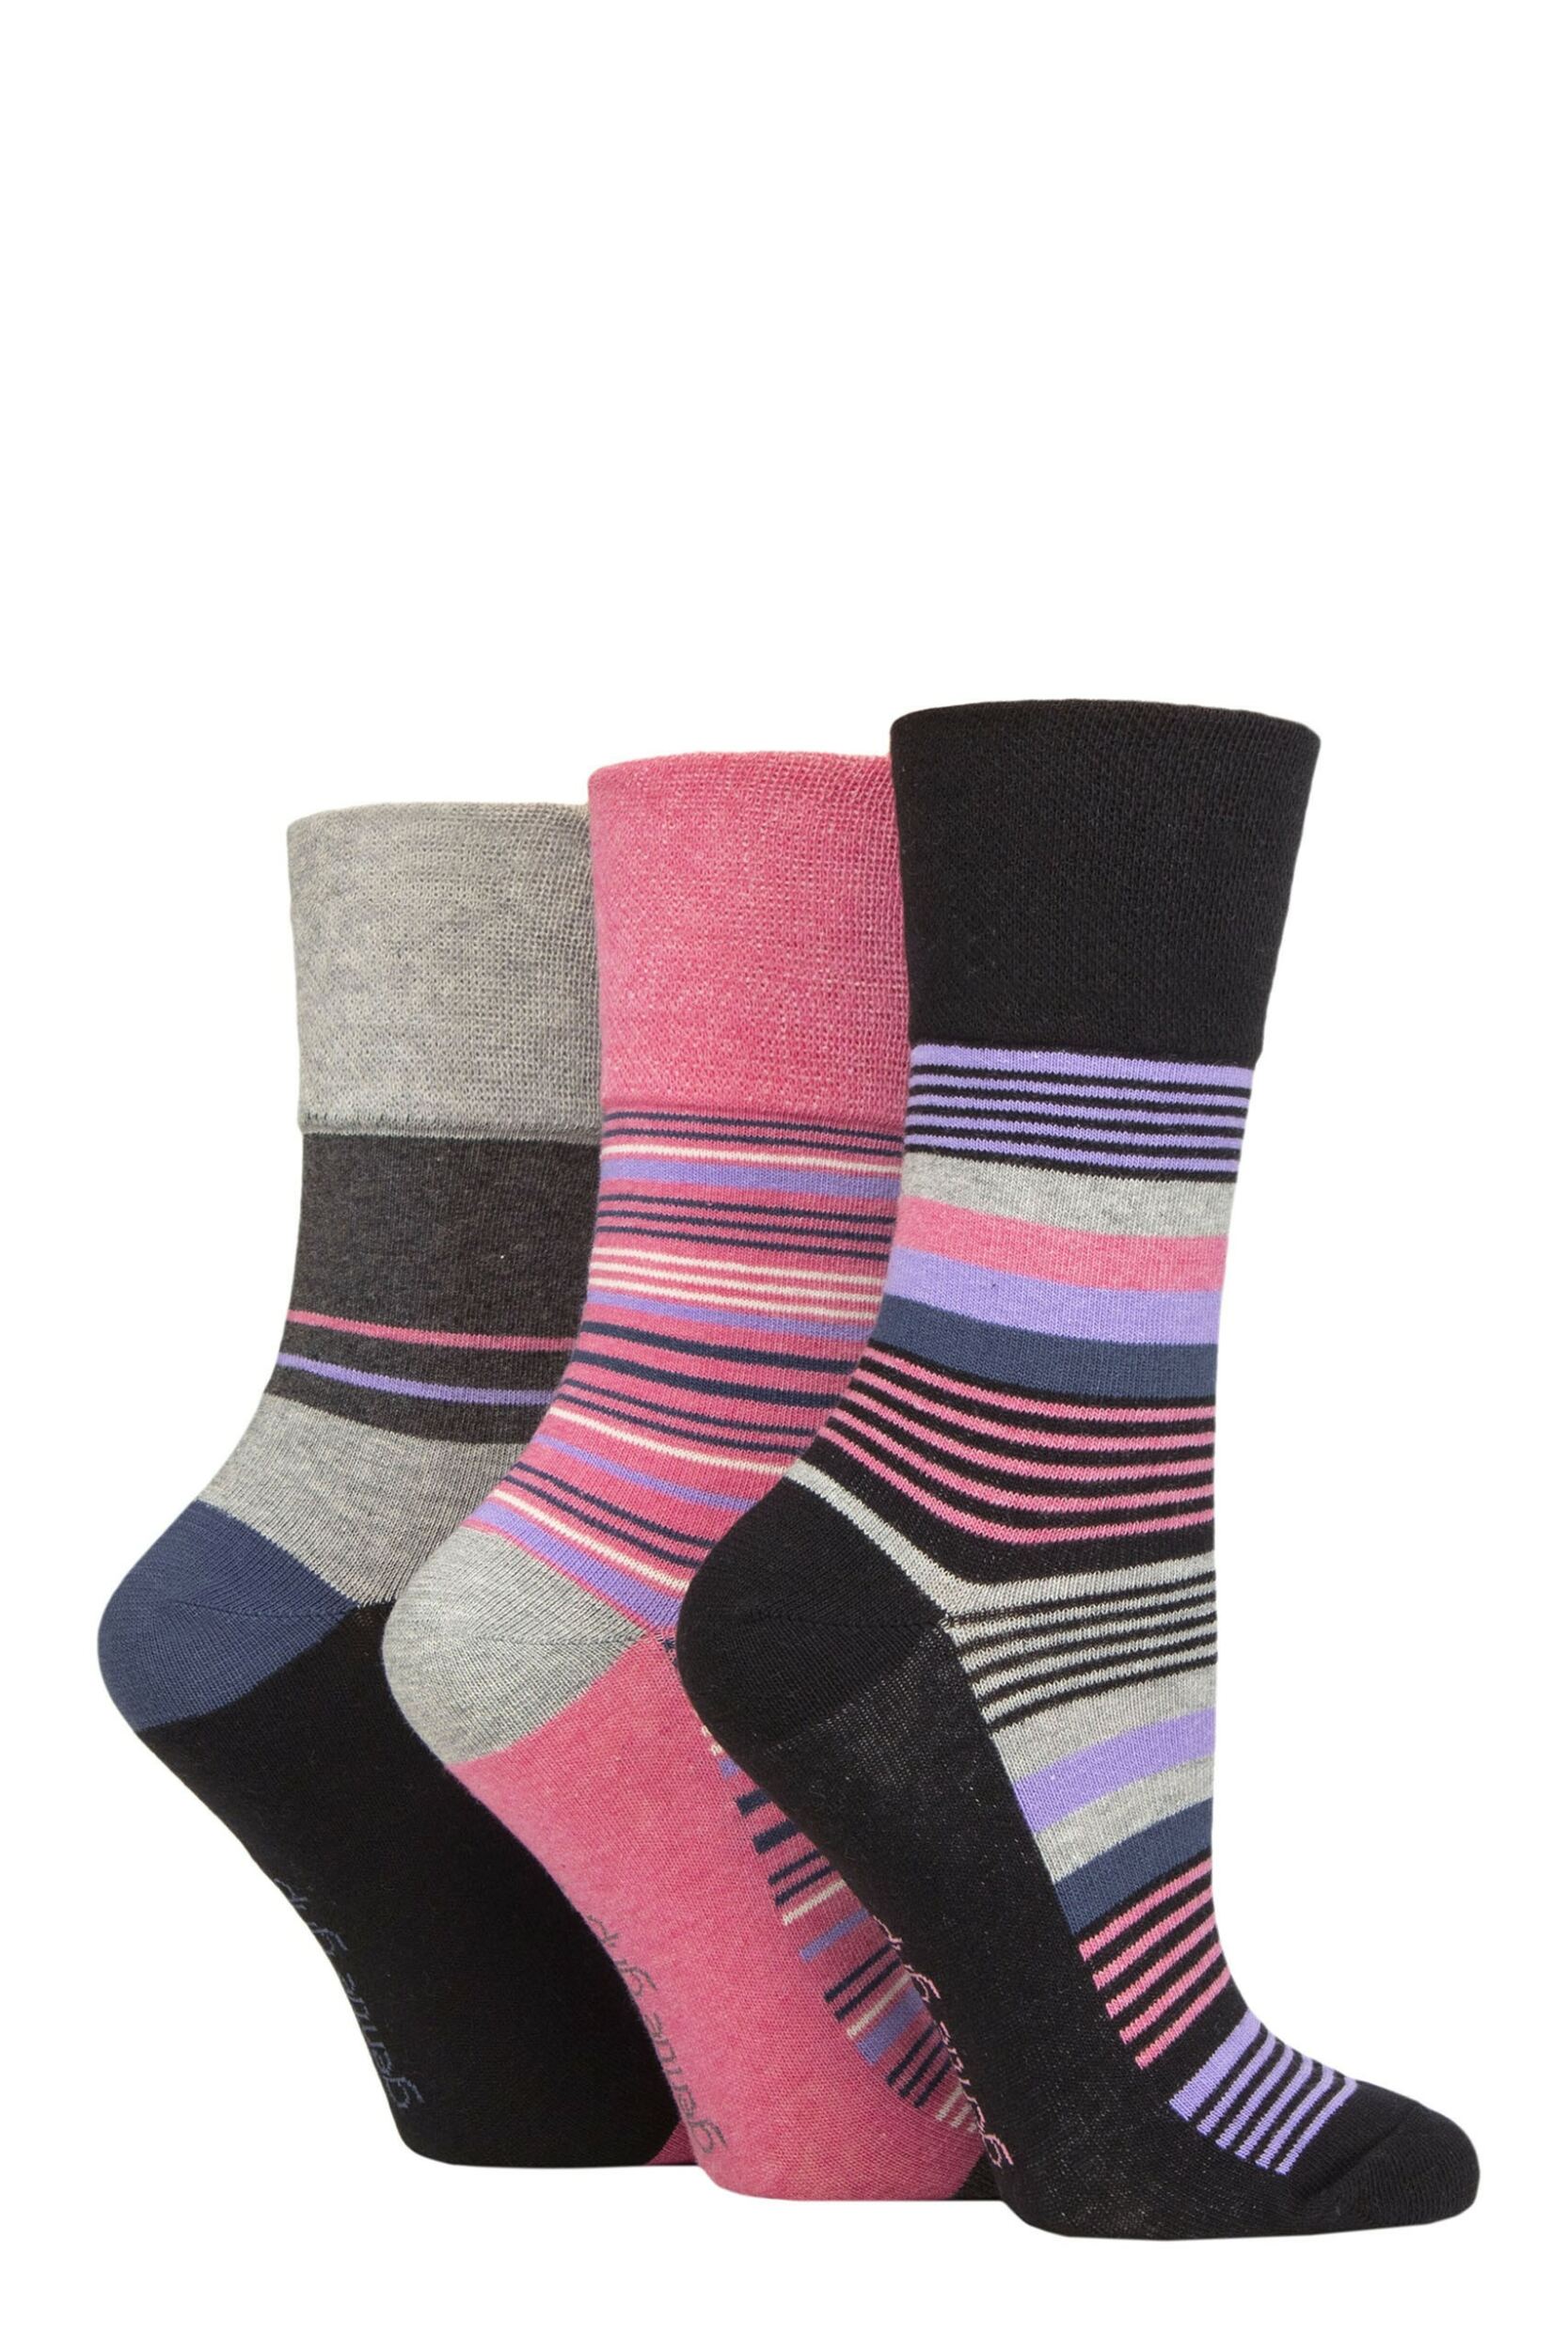 Ladies 3 Pair Gentle Grip Cotton Patterned and Striped Socks Dreamy Discovery Black / Pink 4-8  - Multi Coloured - Size: 4-8 Ladies